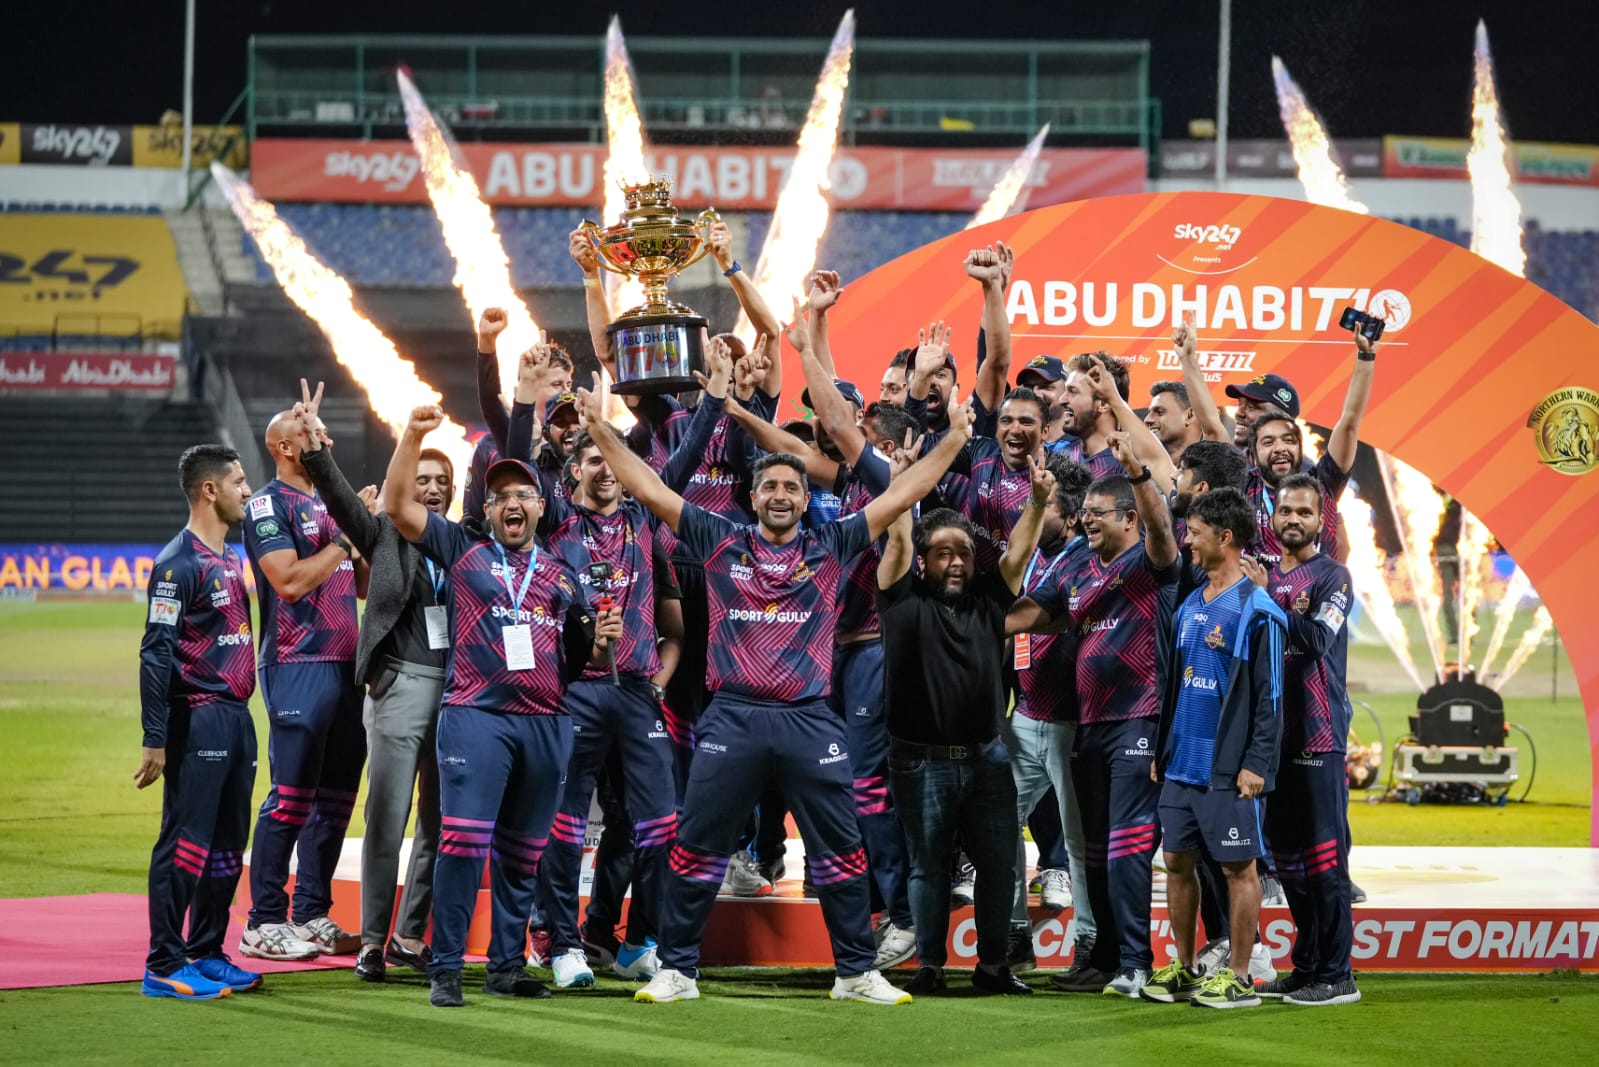 Russell, Cadmore star as DG lift the Abu Dhabi T10 title